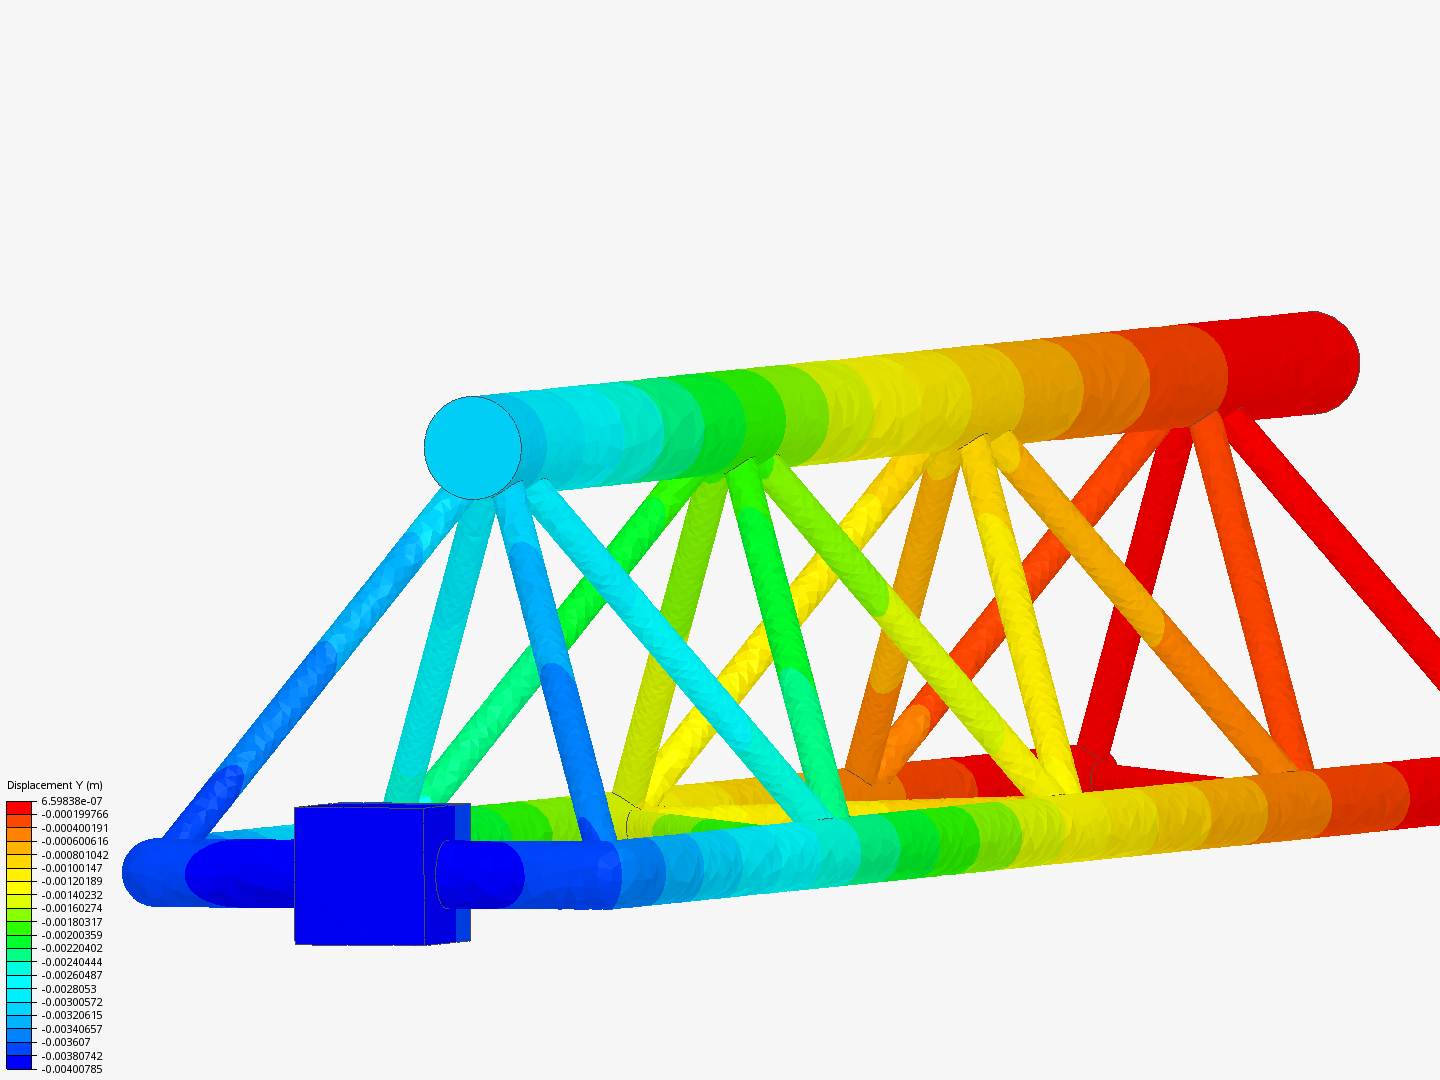 ANSYS of Crane image